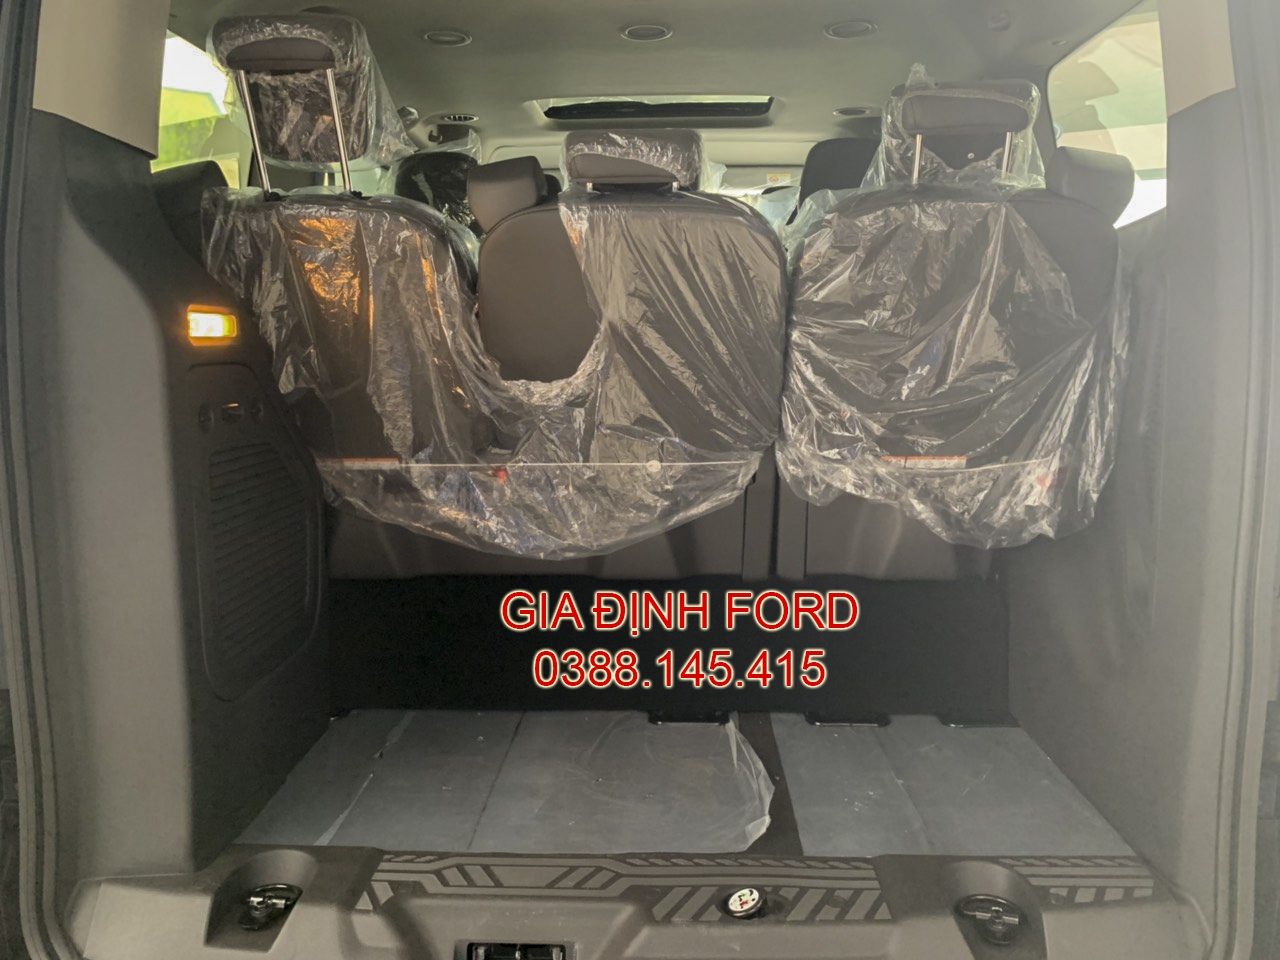 Ford Tourneo  Trend 2019 - Ford Tourneo Trend - giảm giá khủng - giao xe ngay - LH: 0388.145.415